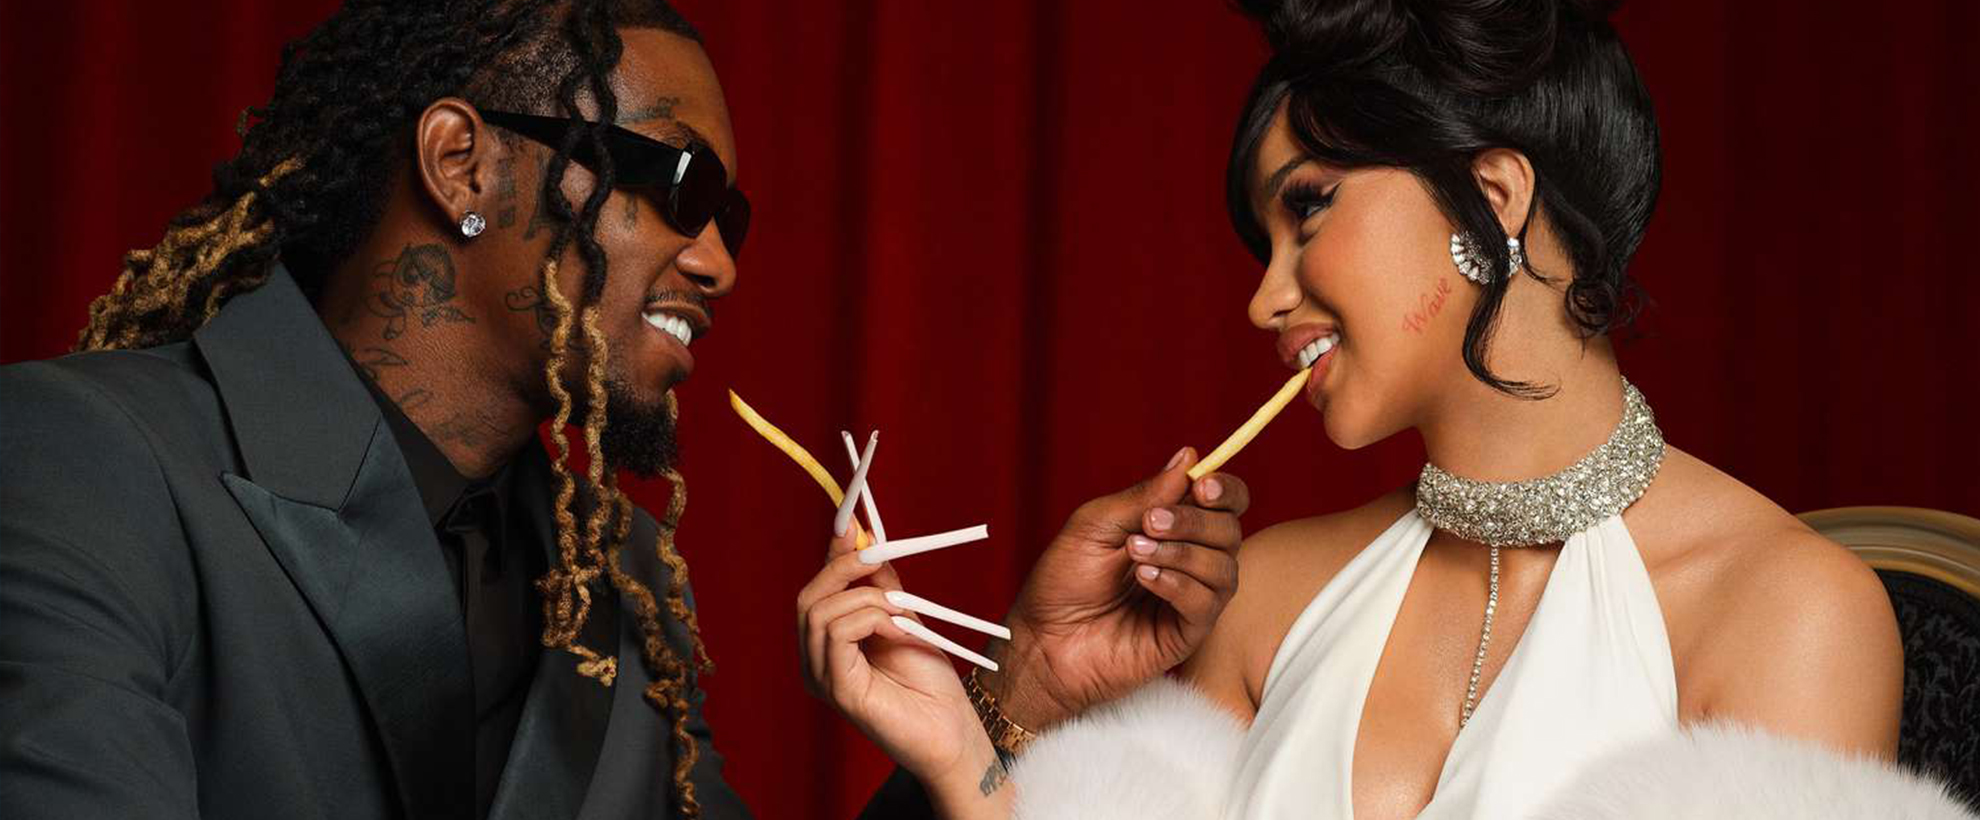 Cardi B and Offset feed each other McDonalds french fries